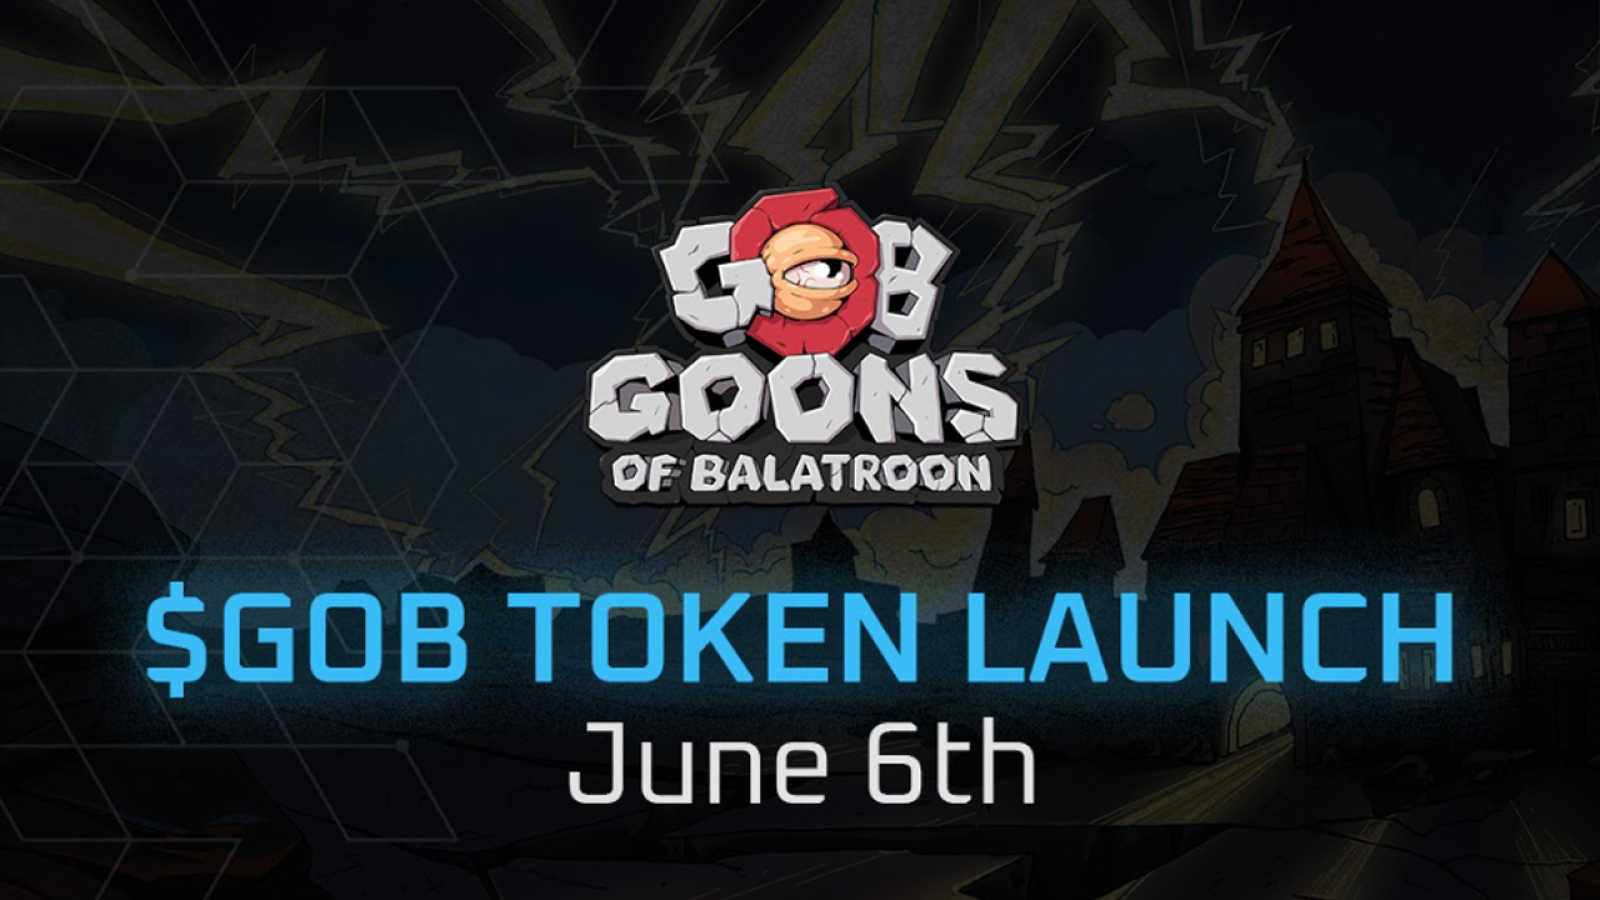 Stunning Triple-Header of TDx, Bullperks and Poolz Spearhead $GOB's IDO Launch on June 6th